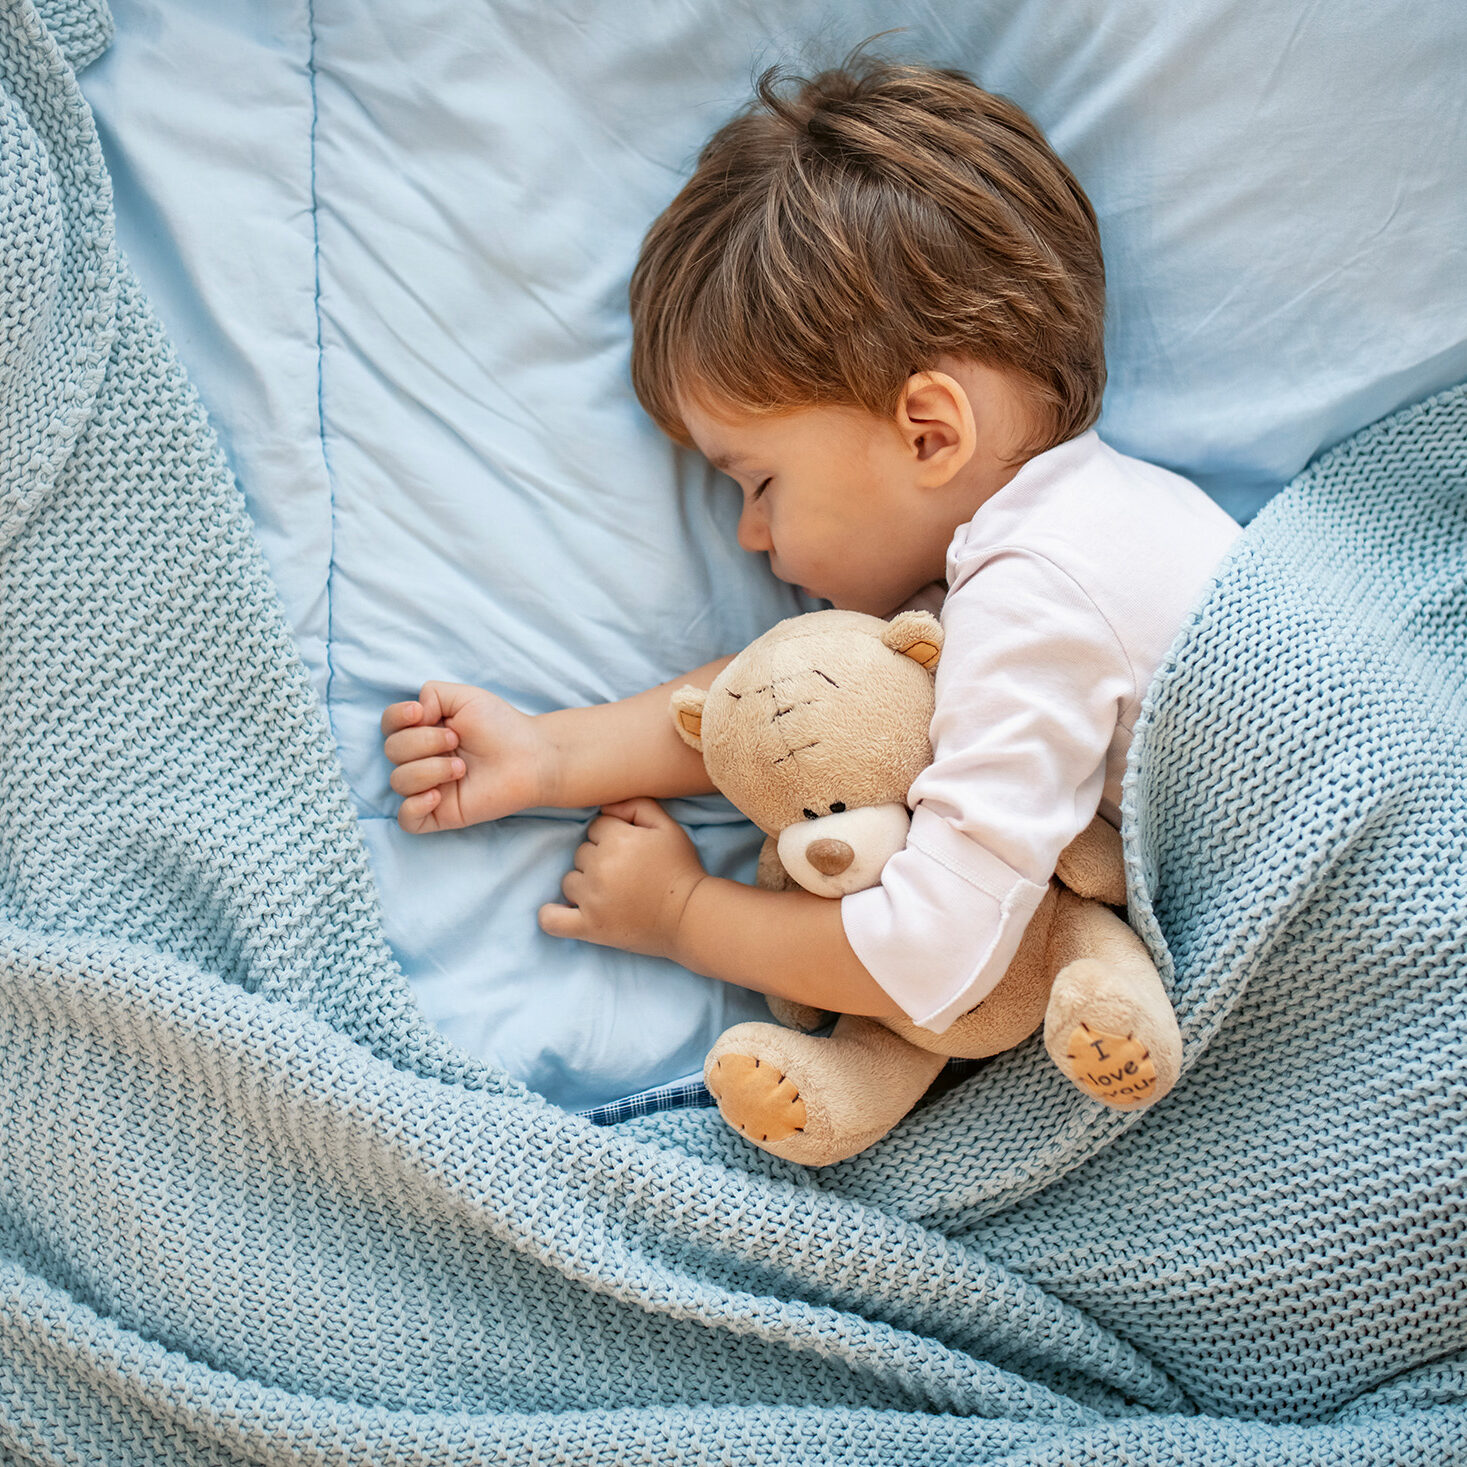 Sweet little boy sleeps with a toy. Young boy in bed sleeping and hug teddy bear. Little boy, big dreamer. It’s bedtime for baby and bear. With teddy close by he has the softest sweetest dreams